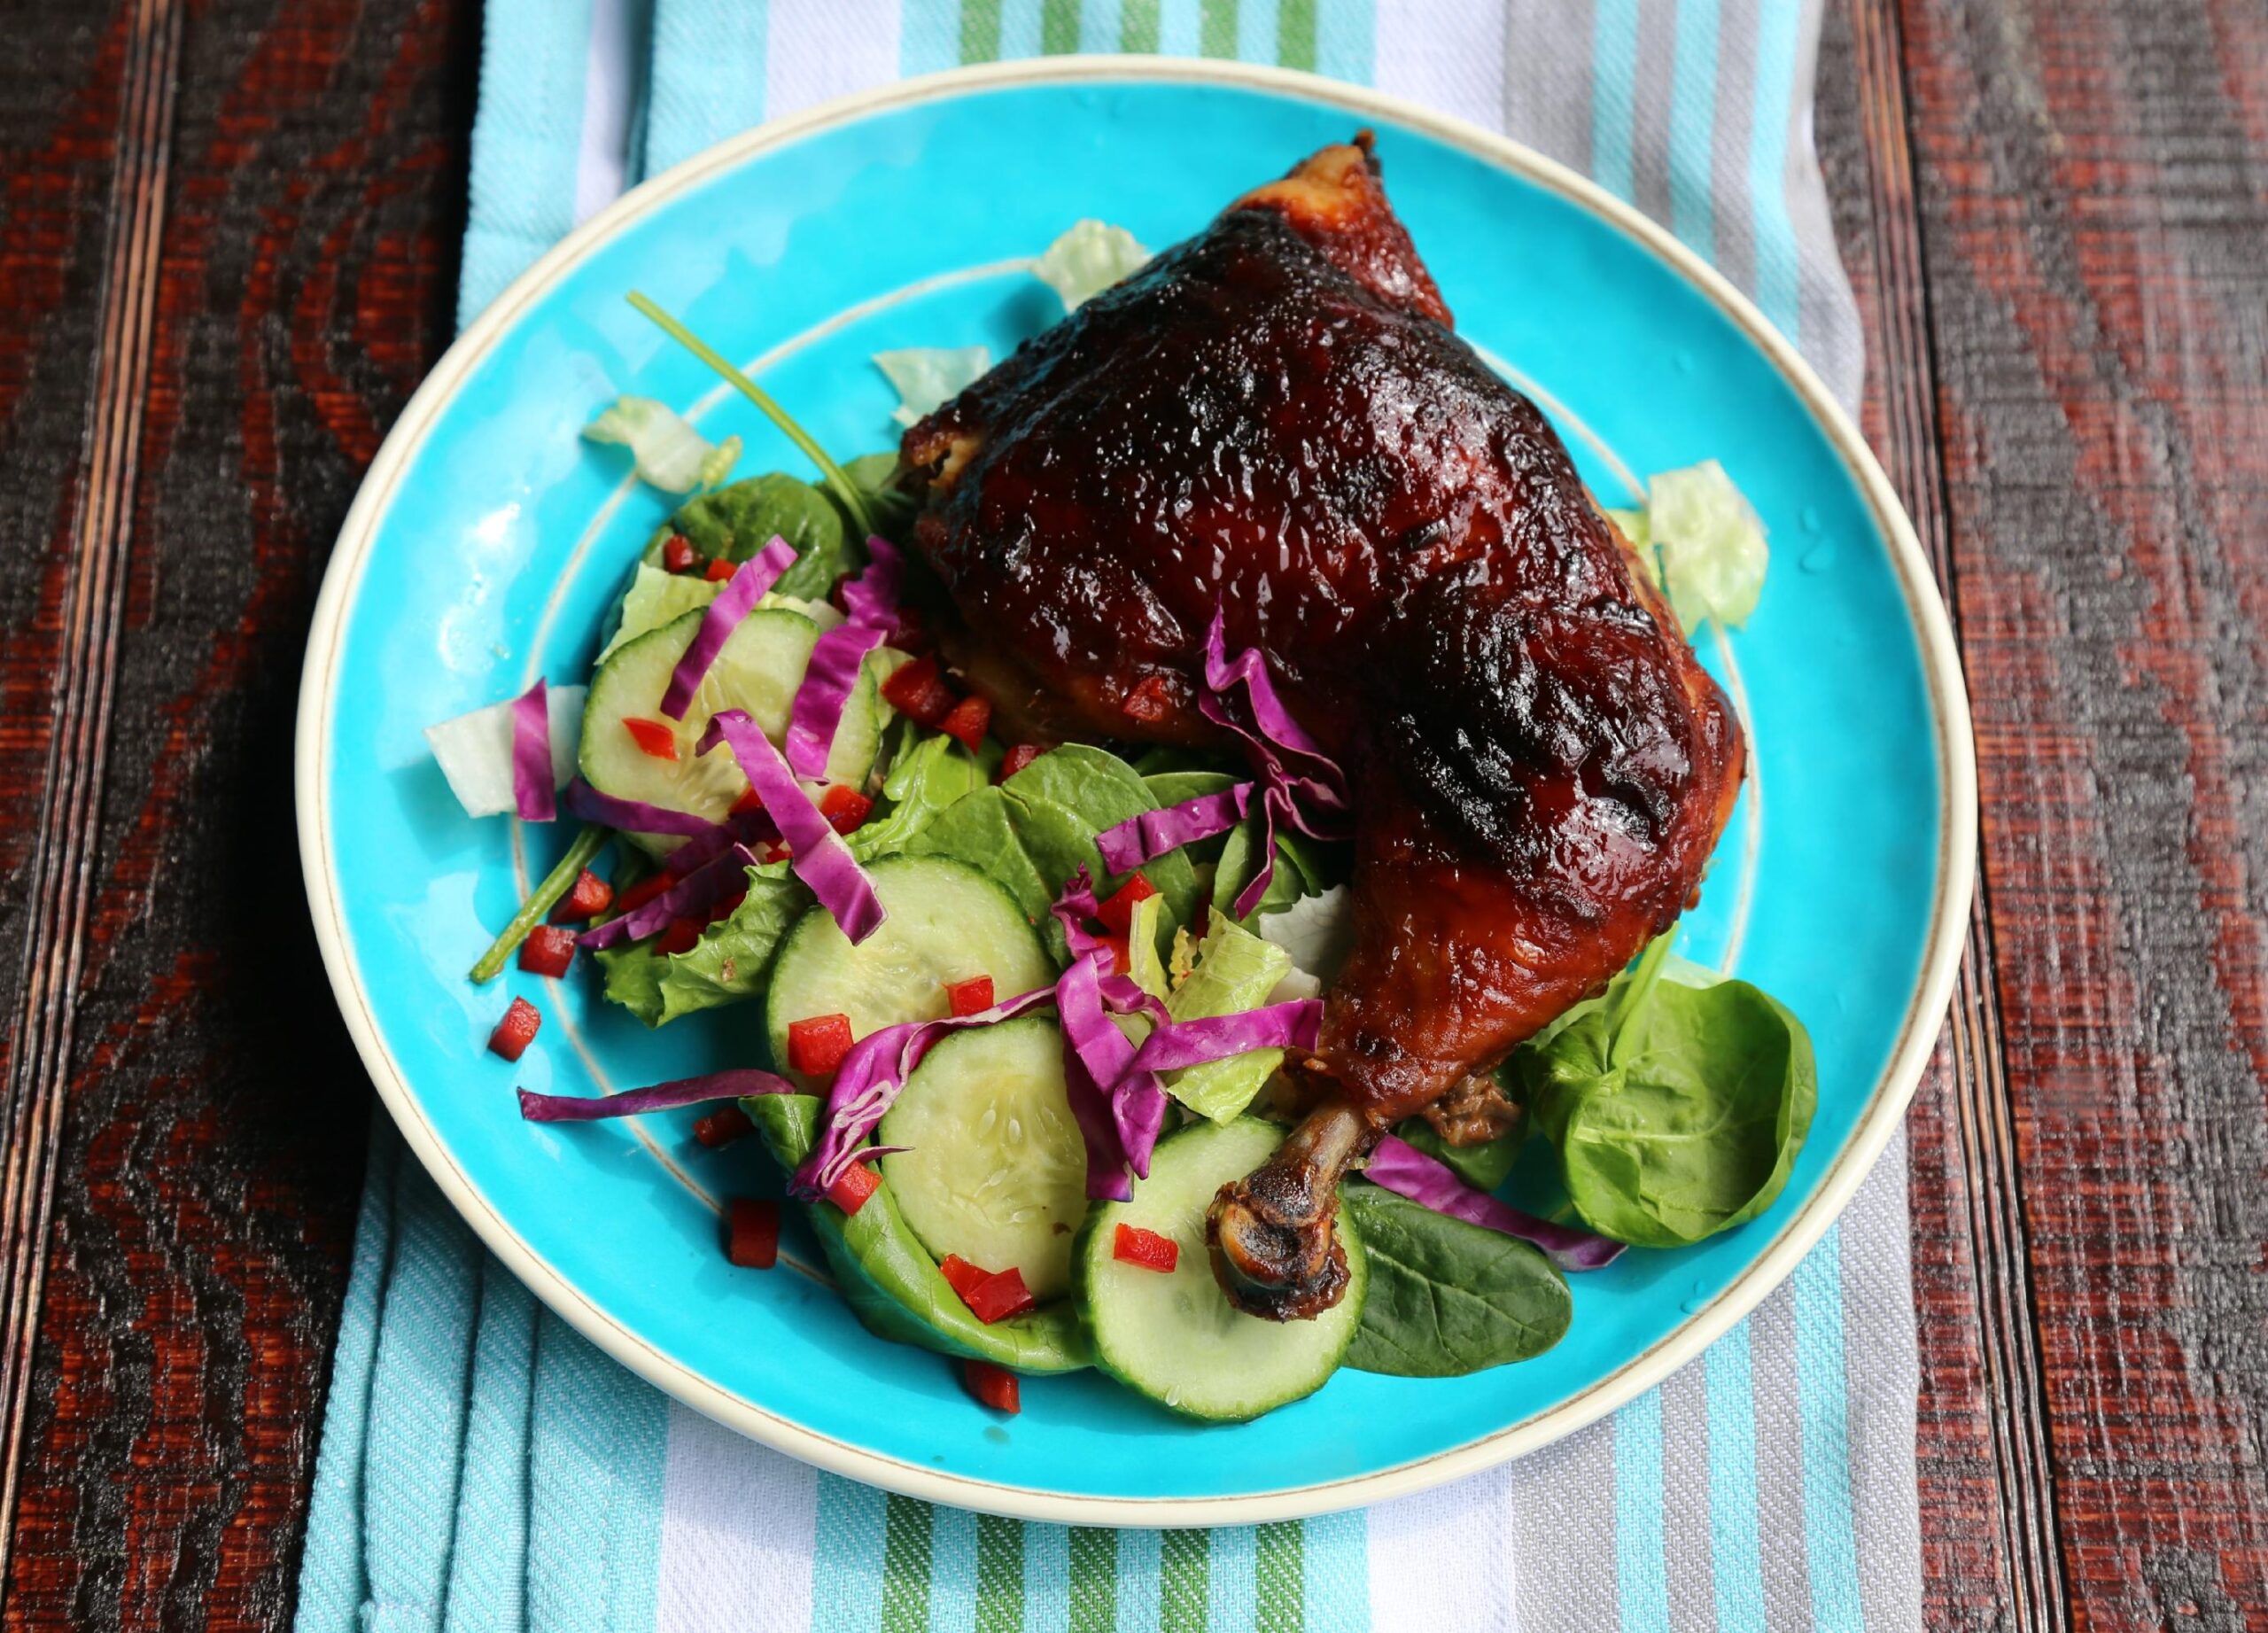  Get ready to satisfy your cravings with this Grilled Chicken With Coffee Barbecue Sauce recipe!